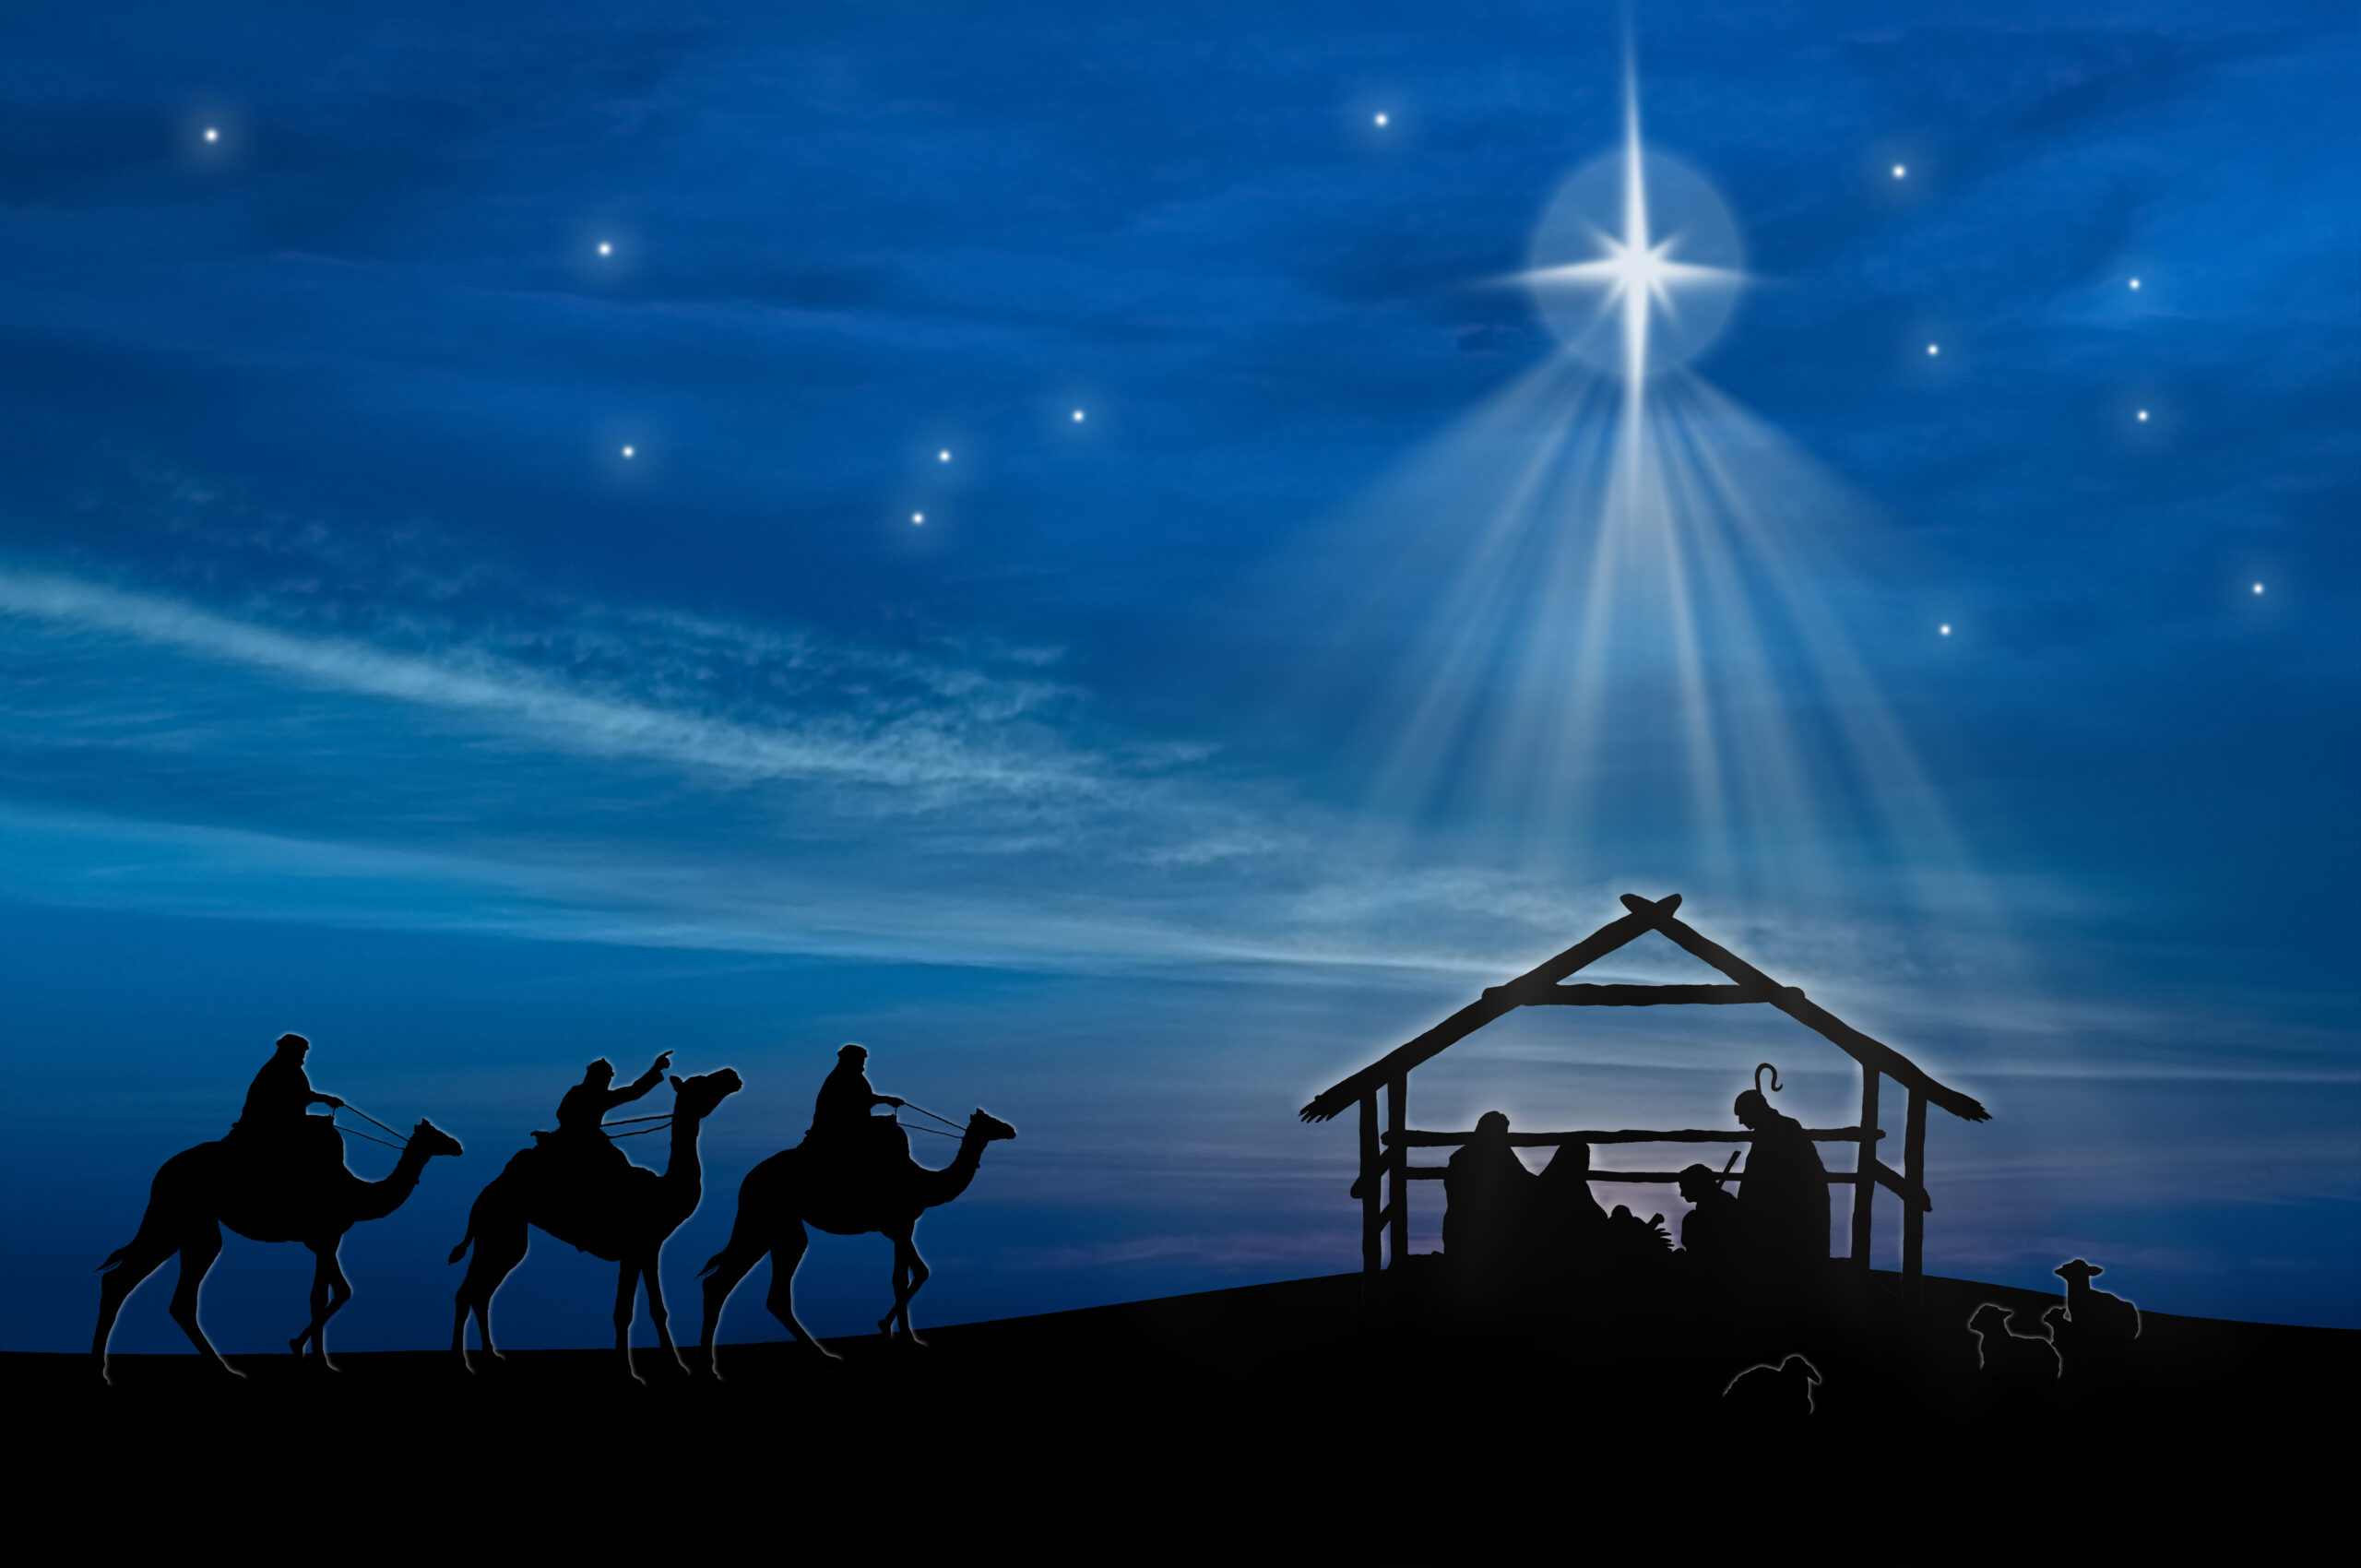 The Christmas story shows how to understand the names of Christ by telling how the wise men knew of their significant meanings.